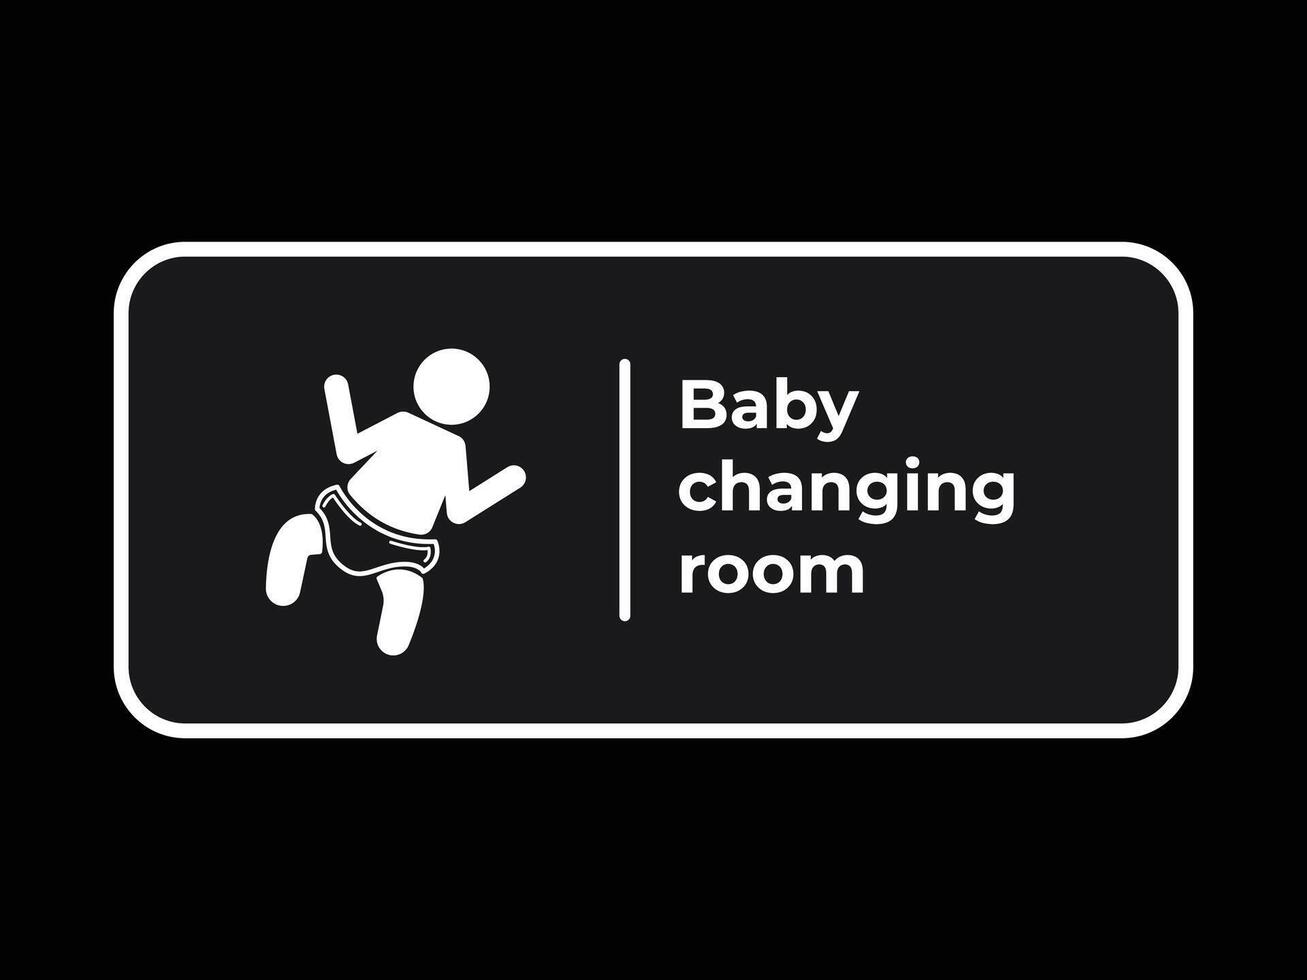 Baby Changing Room sign age white shadow silhouette illustration isolated on square rectangle background. Simple flat cartoon styled drawing. vector